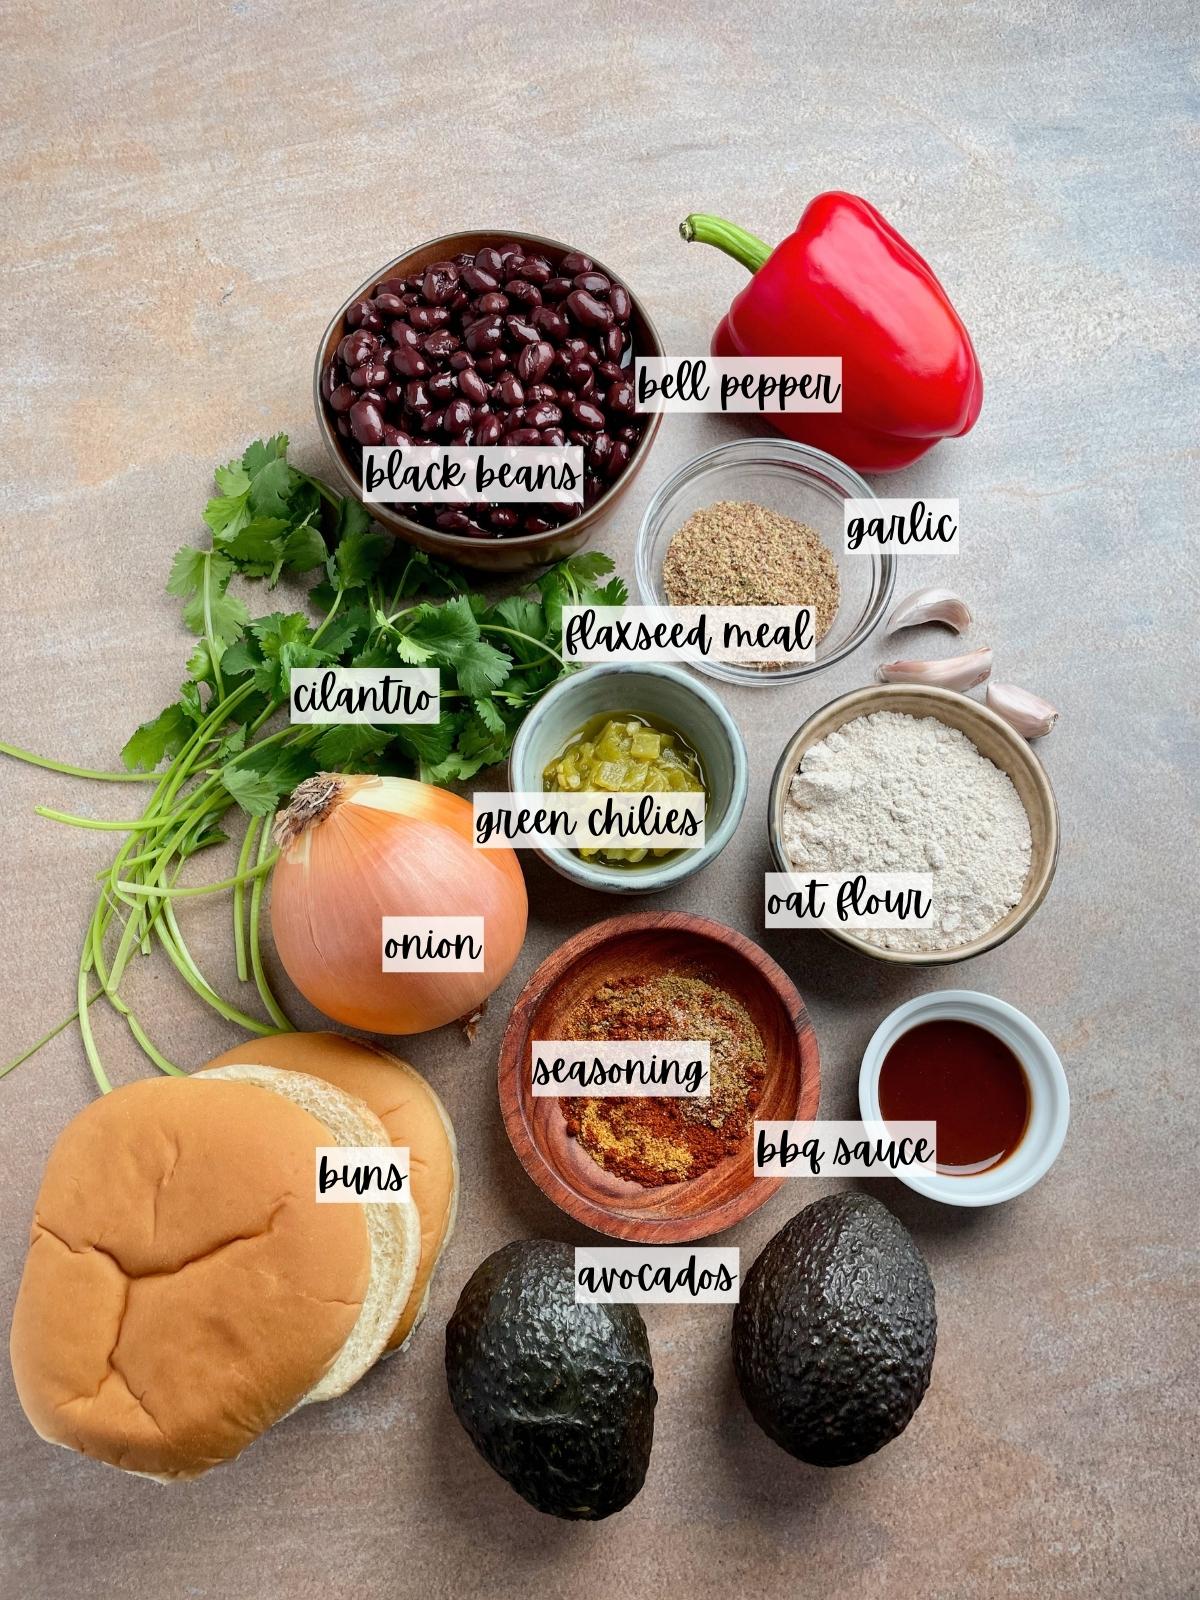 Labeled ingredients for southwestern burgers.